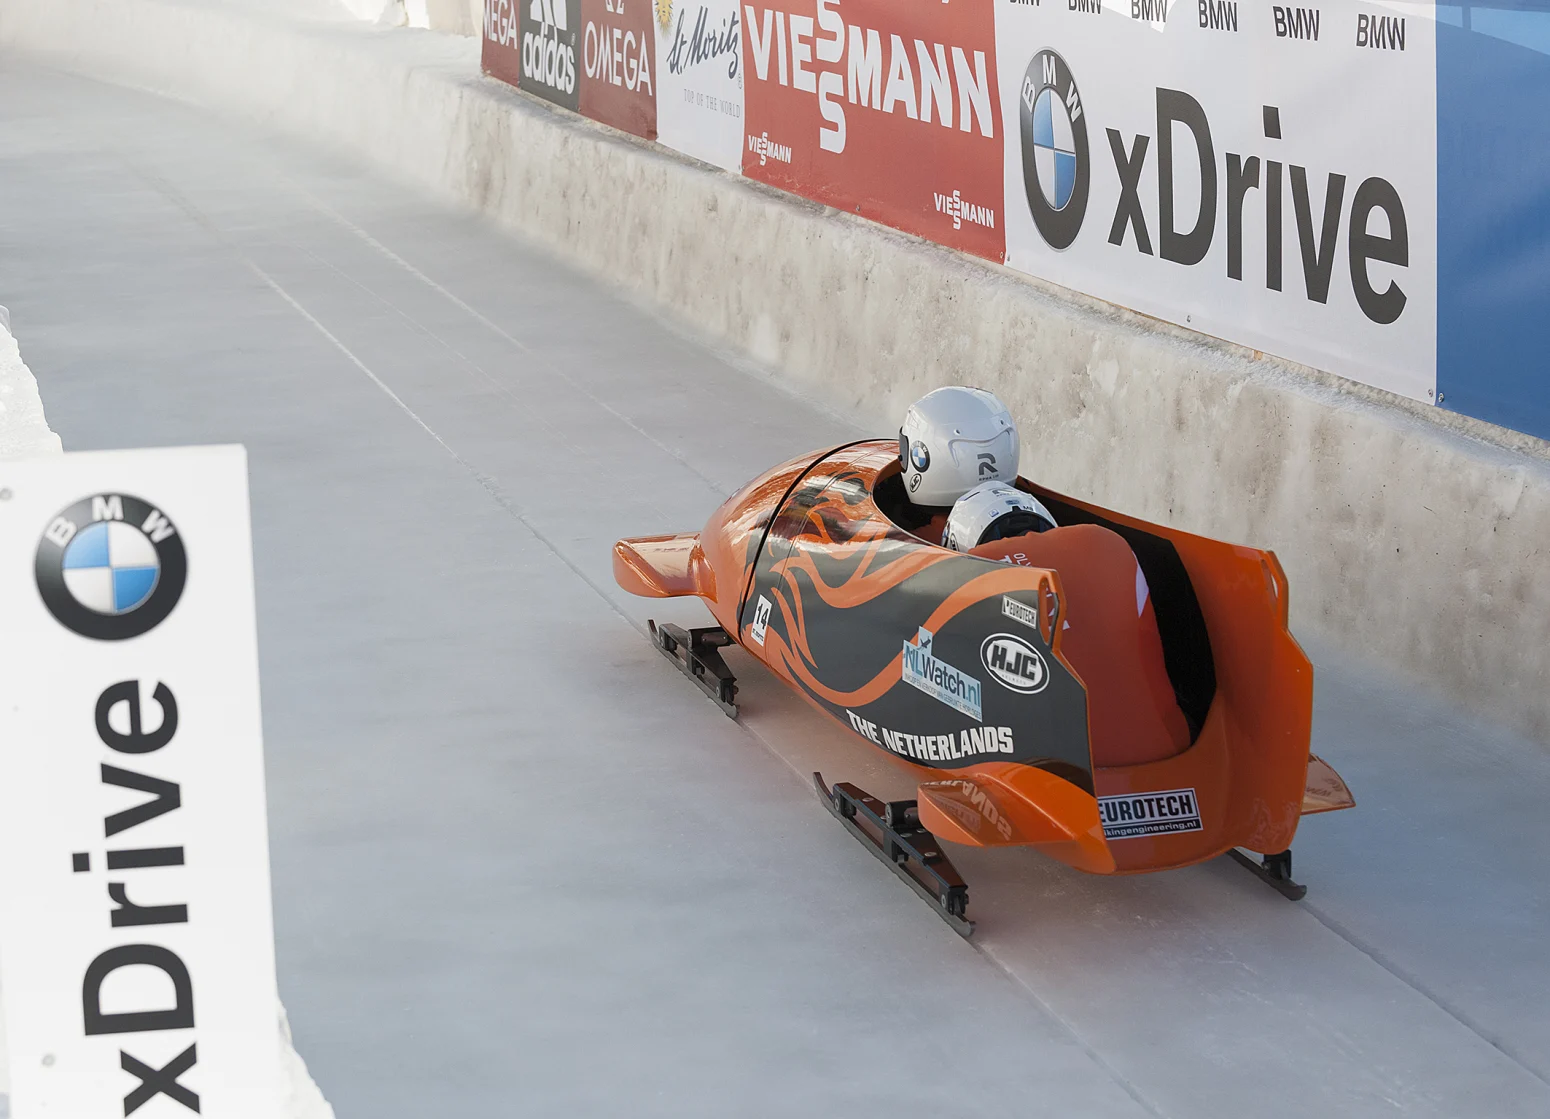 BMW IBSF World Cup Bob and Skeleton set for a strong start with full service delivery by Infront